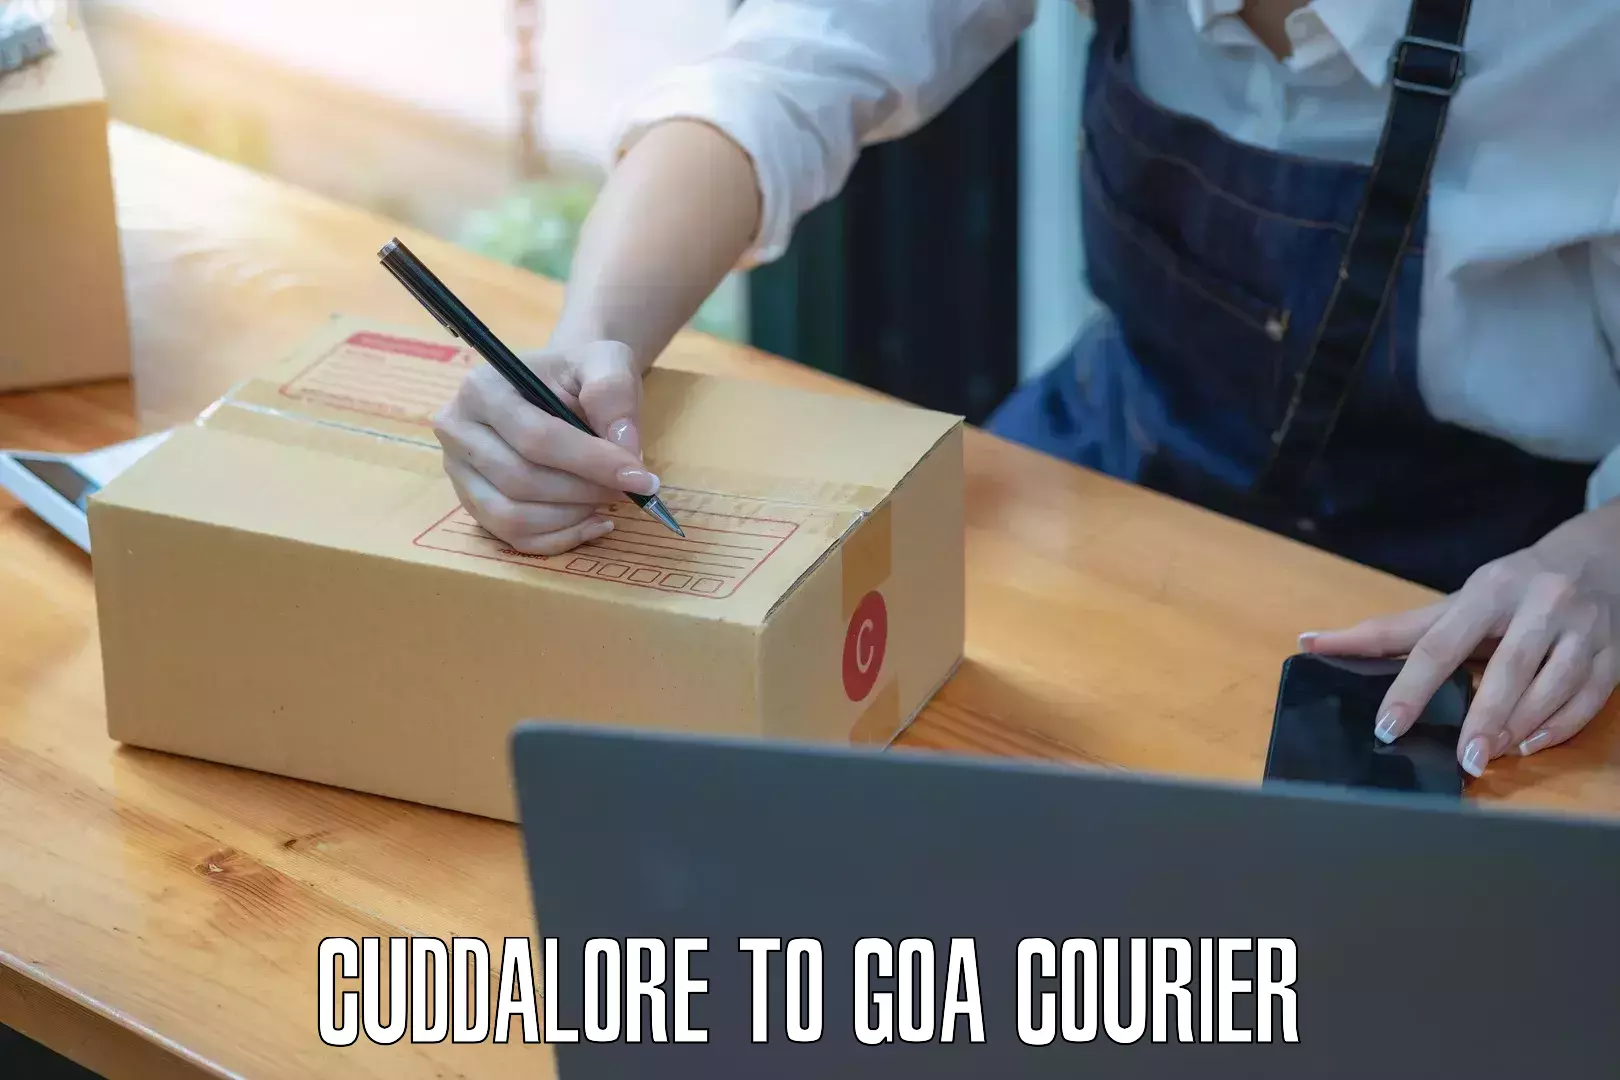 Express delivery network Cuddalore to Goa